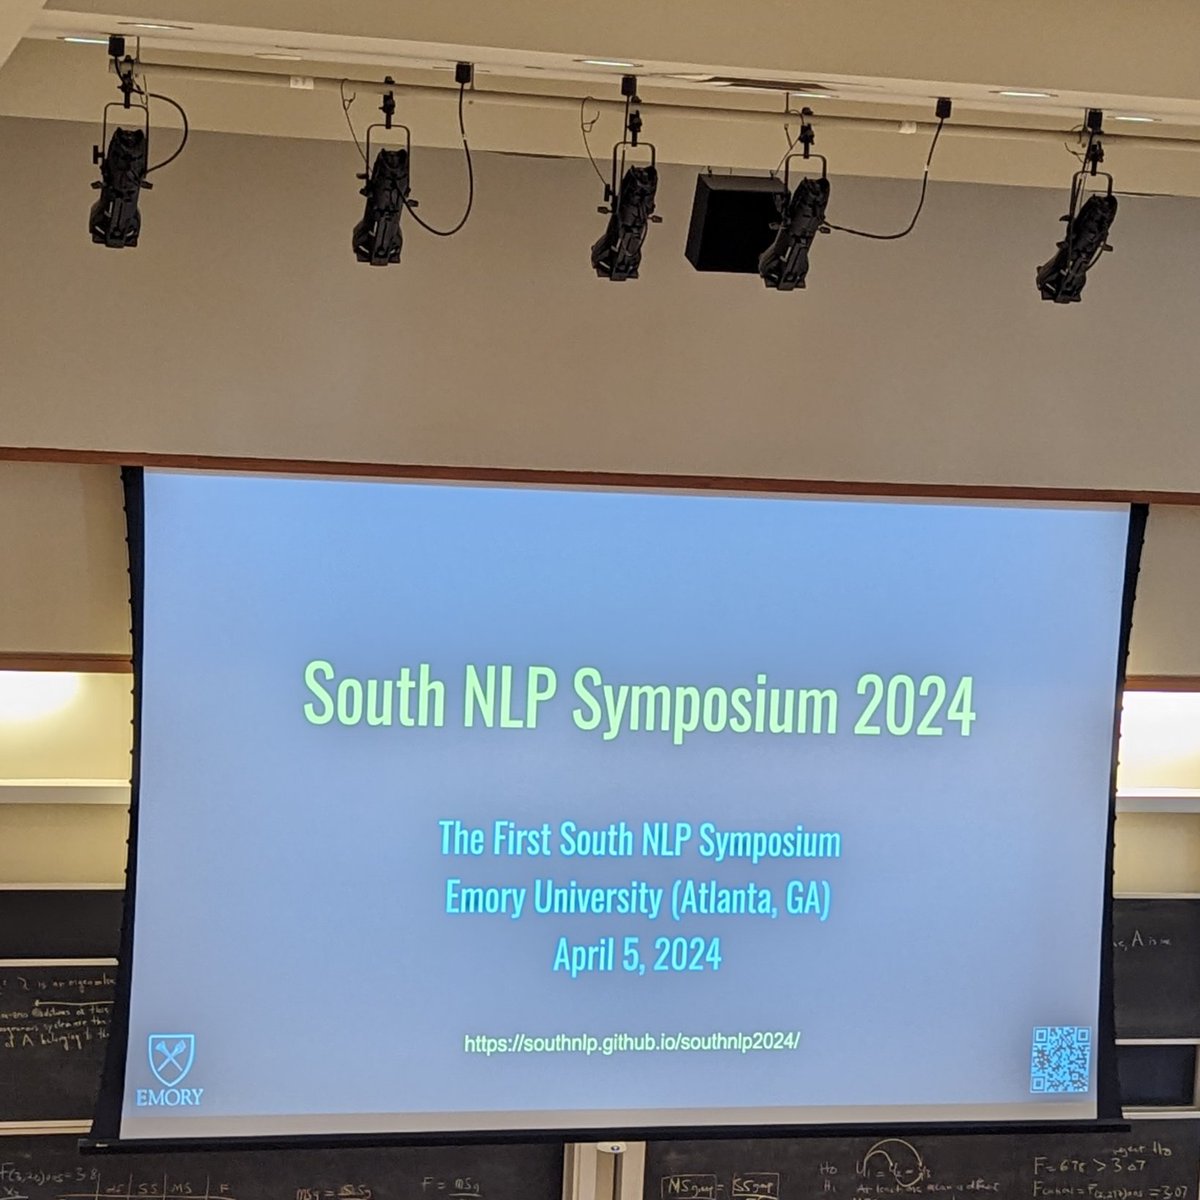 I'll be at the First South NLP Symposium at Emory University today! I'd love to chat with any folks interested in the robustness of NLP systems to linguistic variation (dialects, codeswitching, and closely related languages).